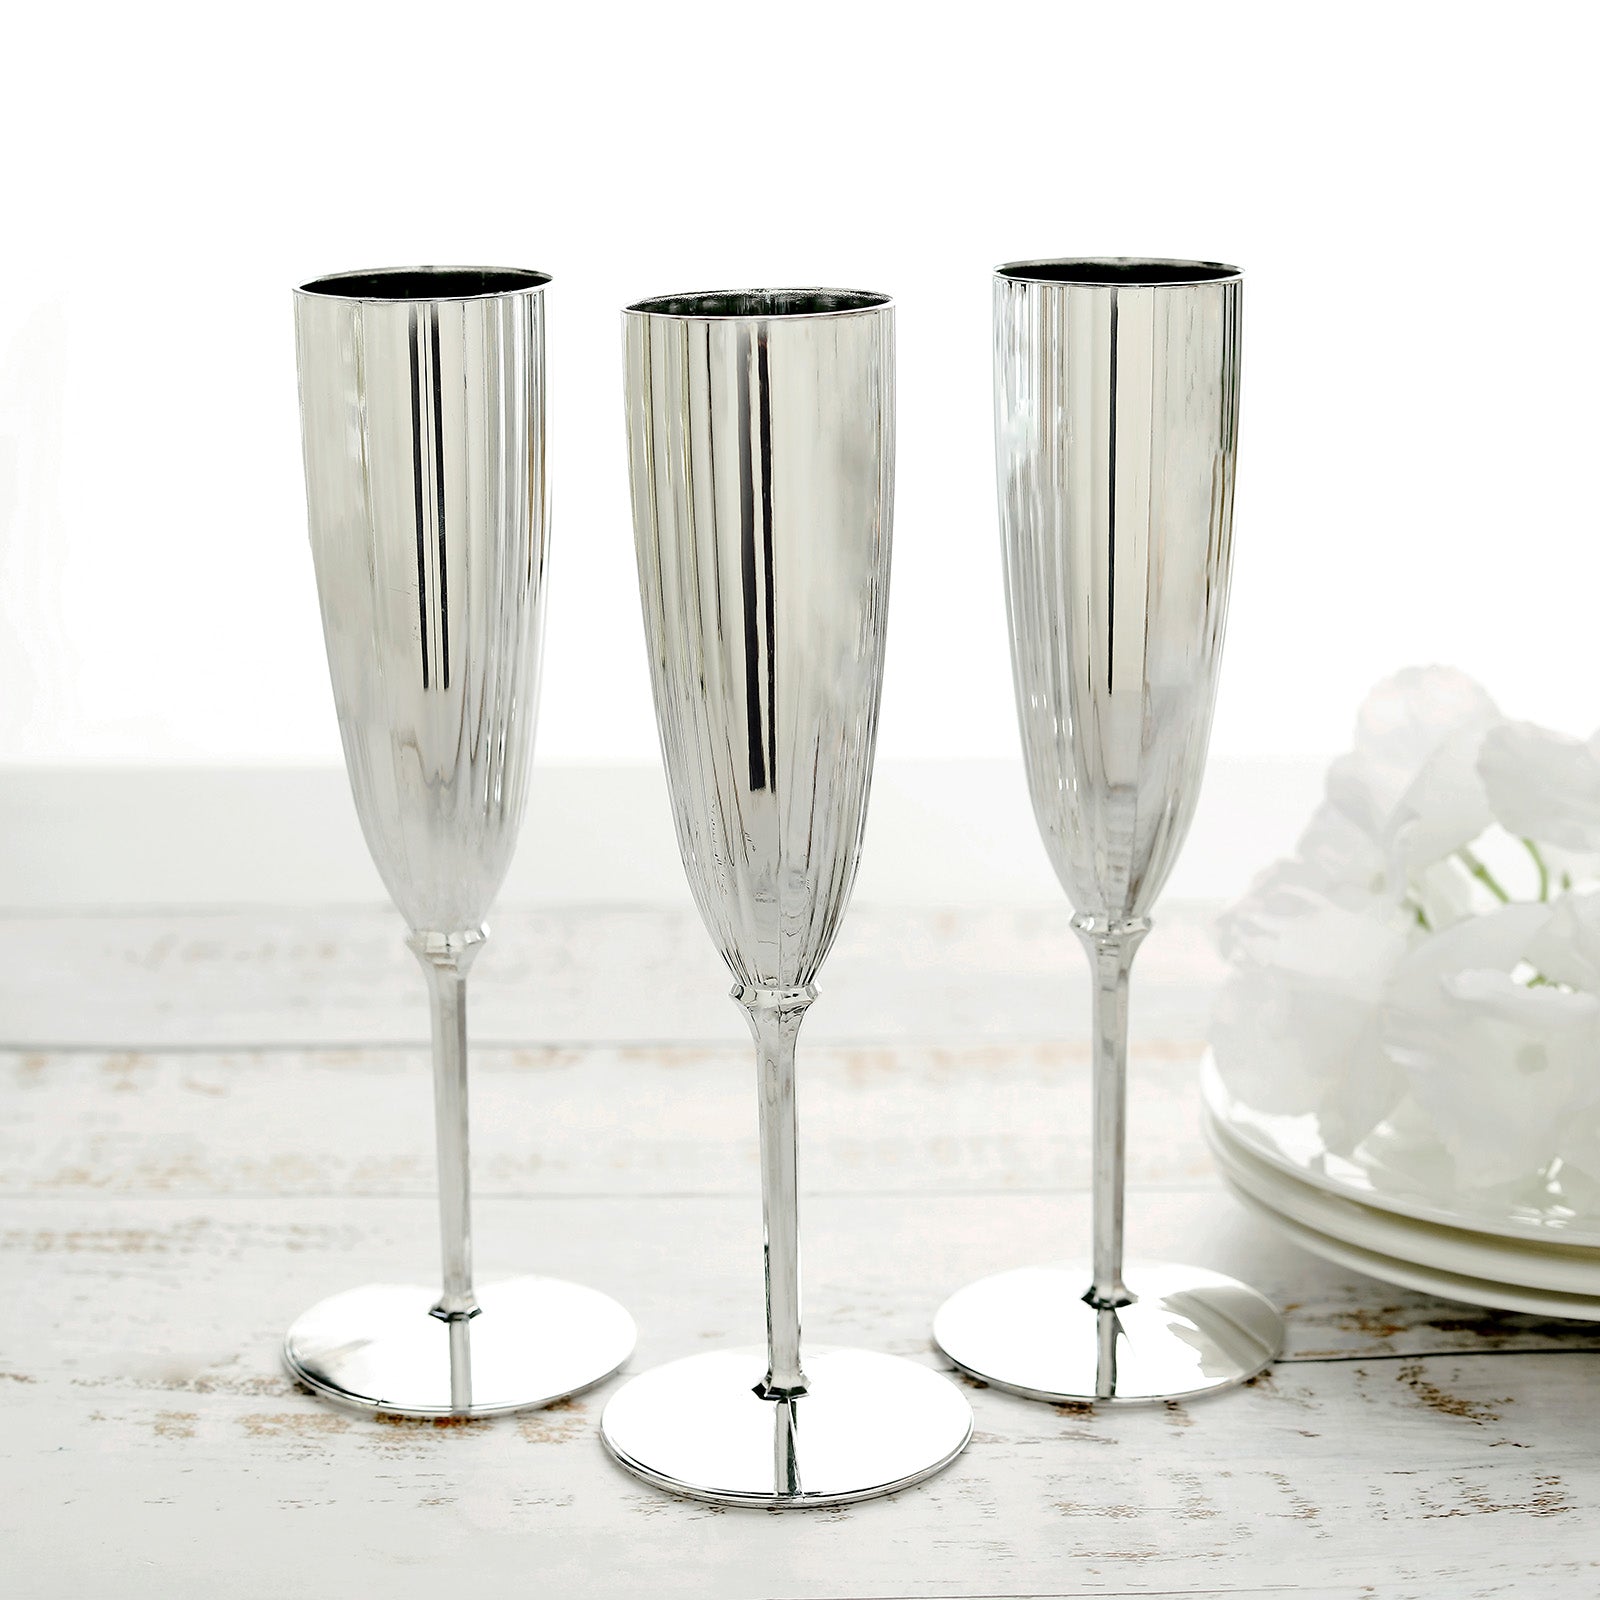 Unbreakable 8 Oz Stainless Steel Champagne Flutes (4 Pack)- Large Stemmed  Matte Silver Champagne Gla…See more Unbreakable 8 Oz Stainless Steel